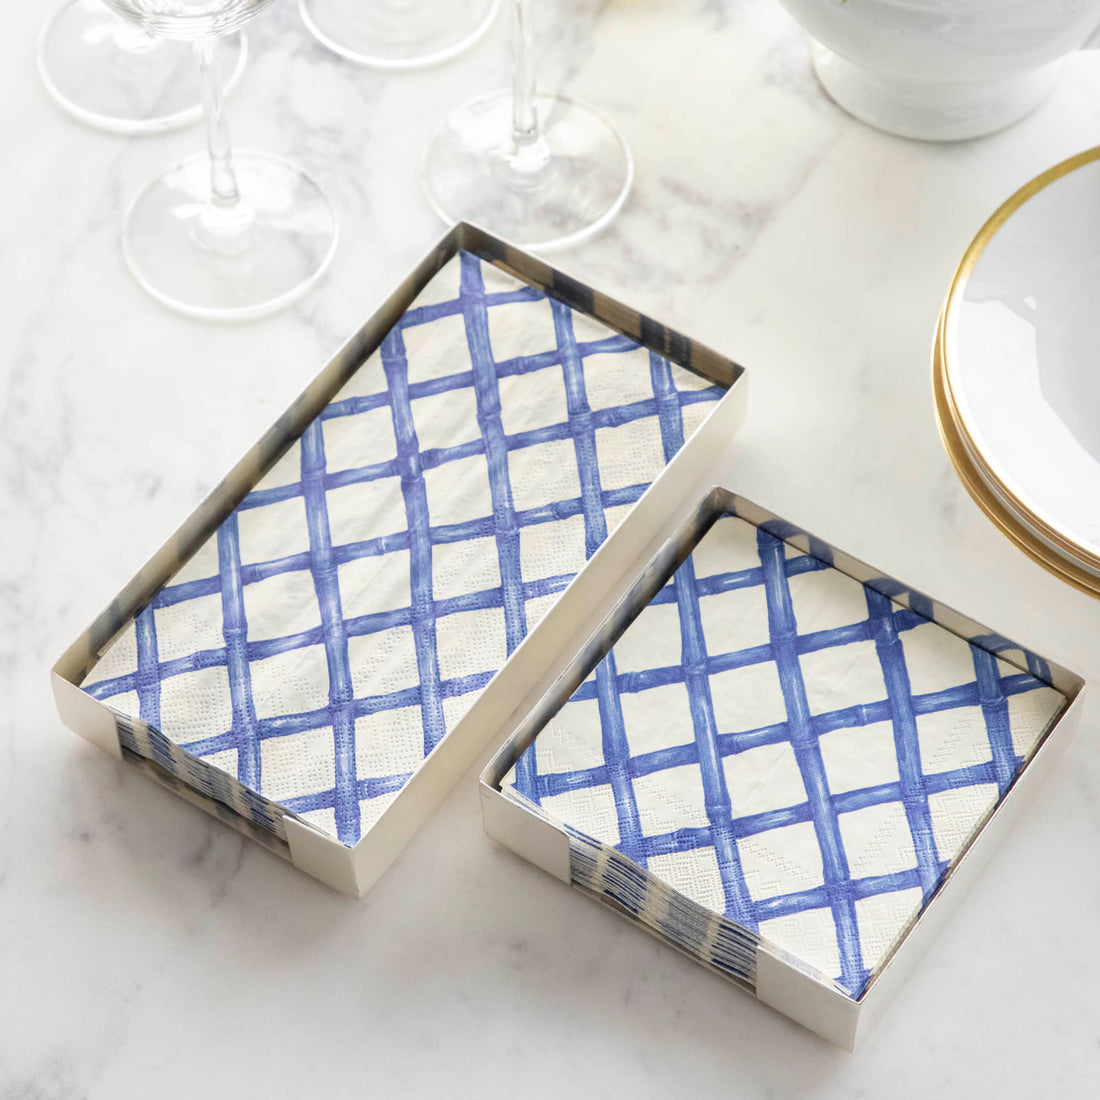 Two Silver Napkin Holders, guest-sized and cocktail-sized, containing blue and white napkins on a white table.